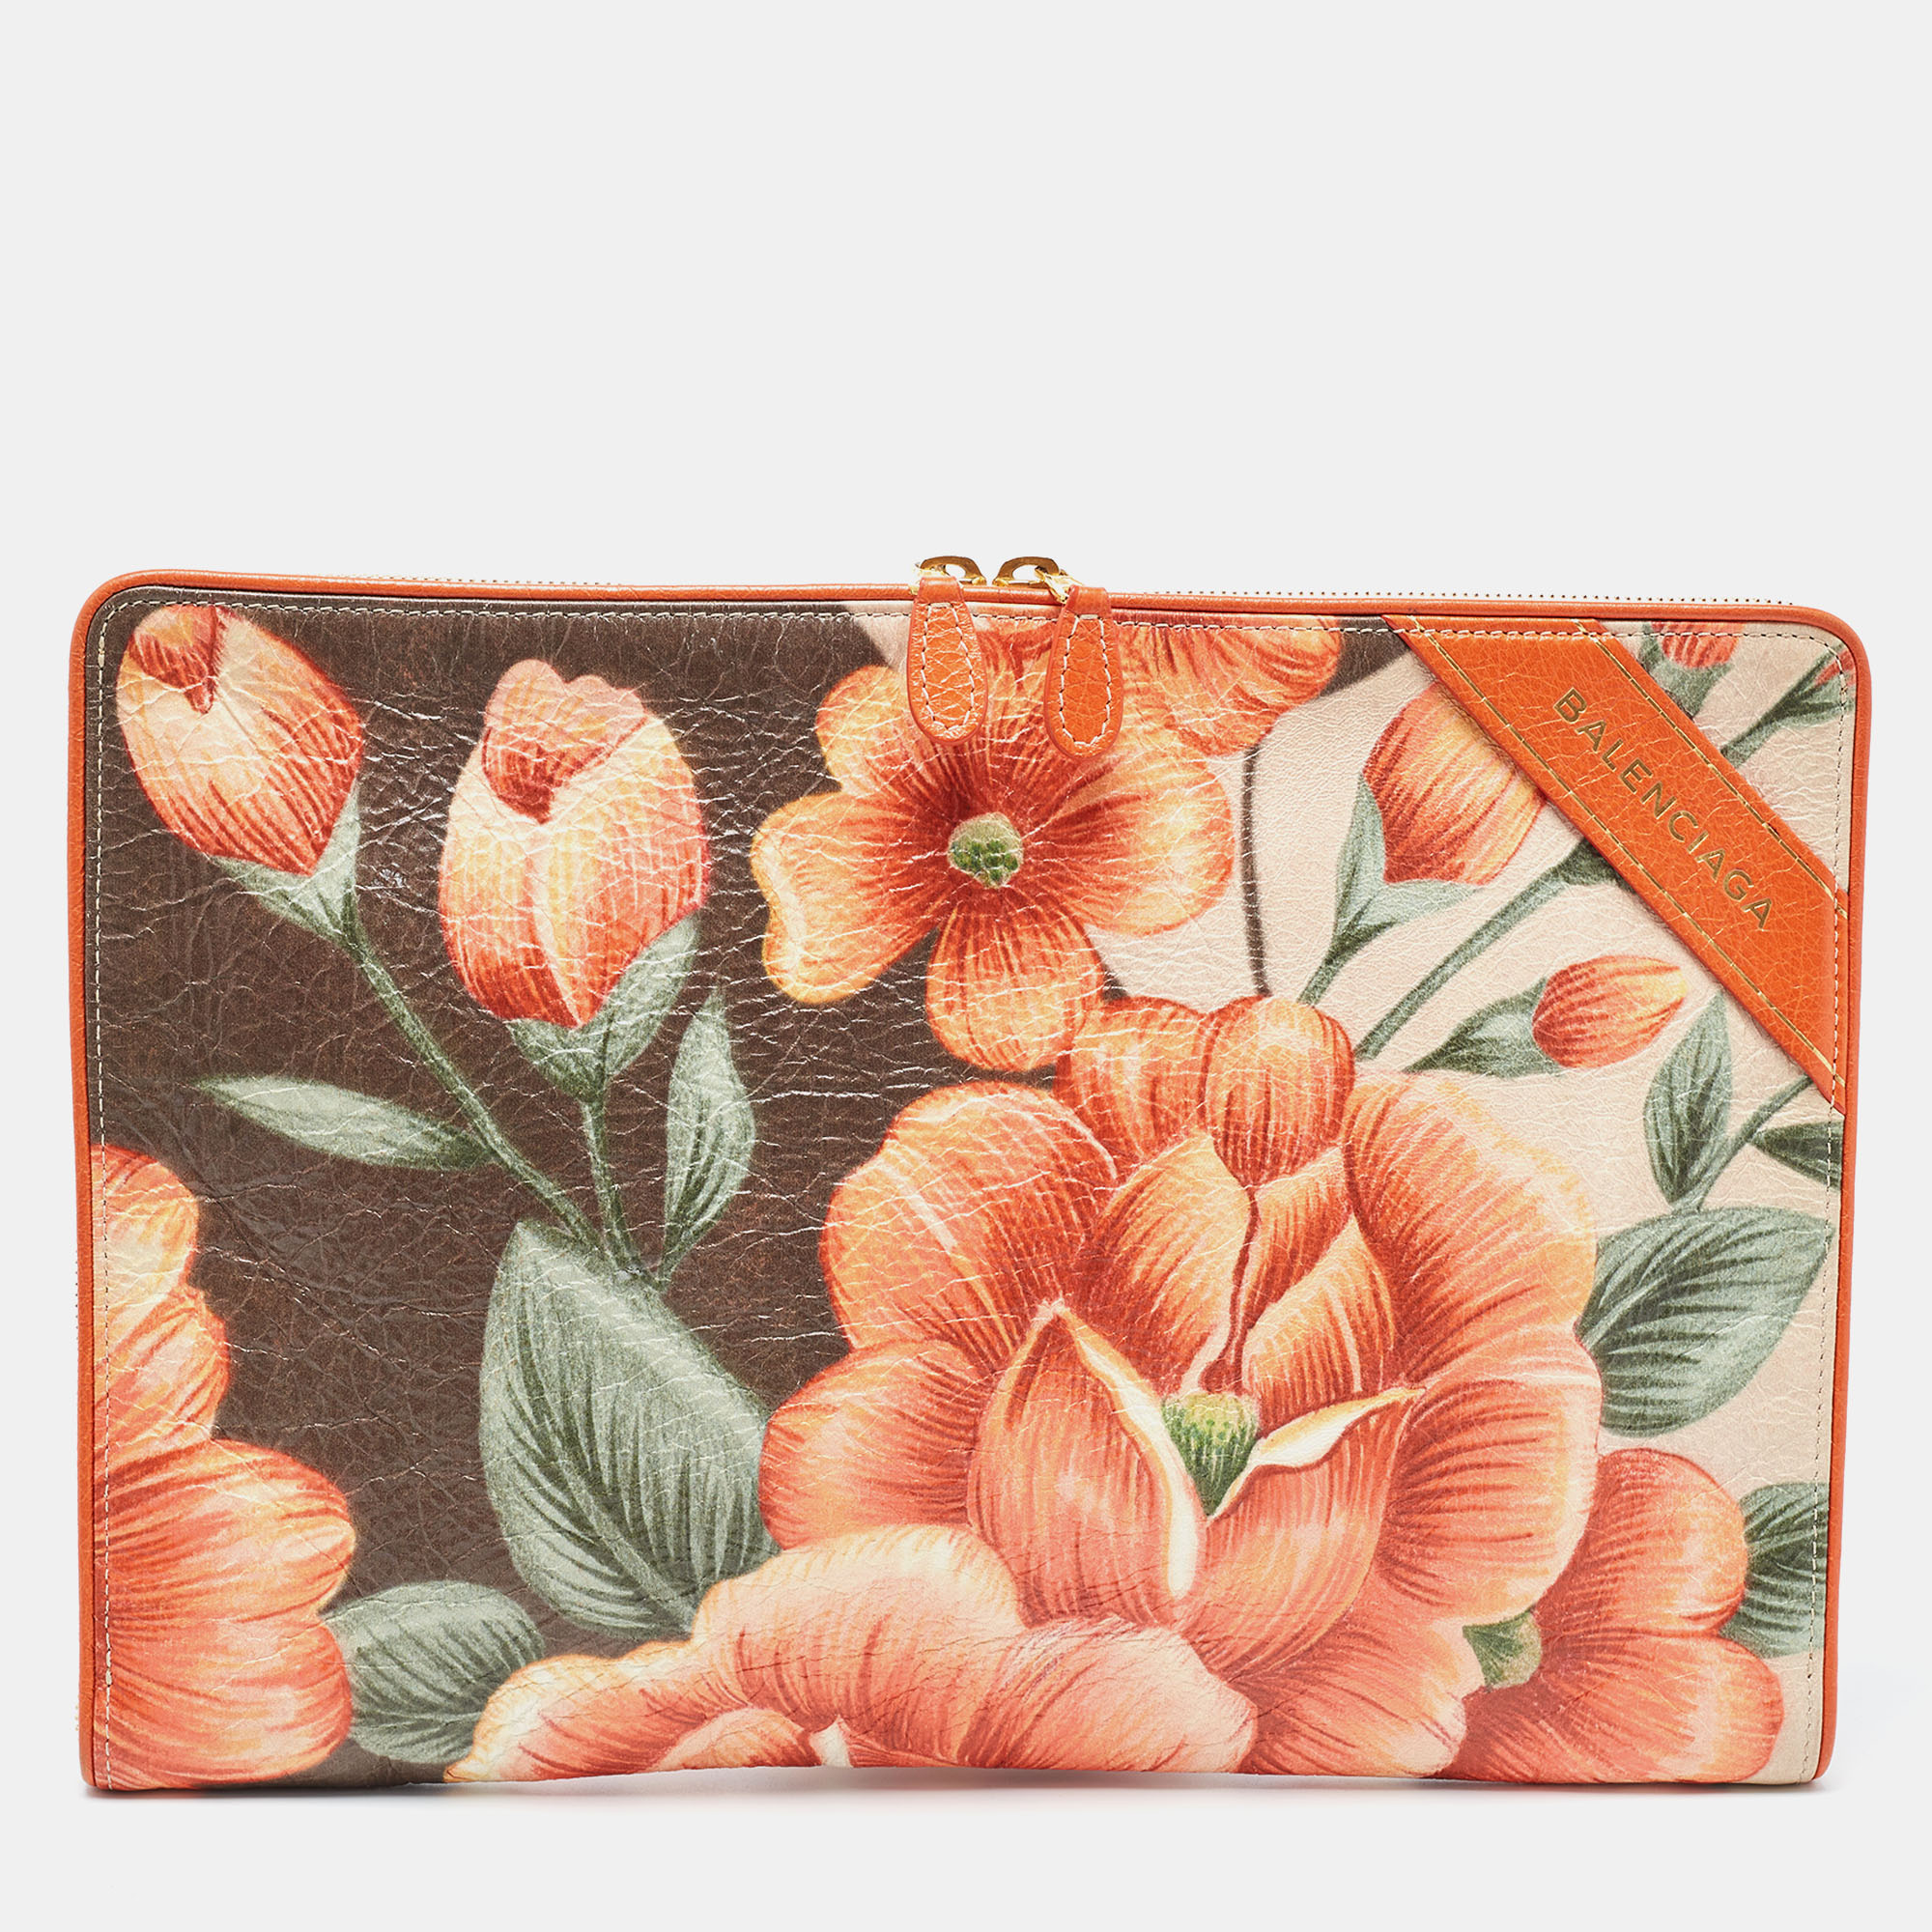 Pre-owned Balenciaga Orange/multicolor Floral Print Leather Blanket Pouch